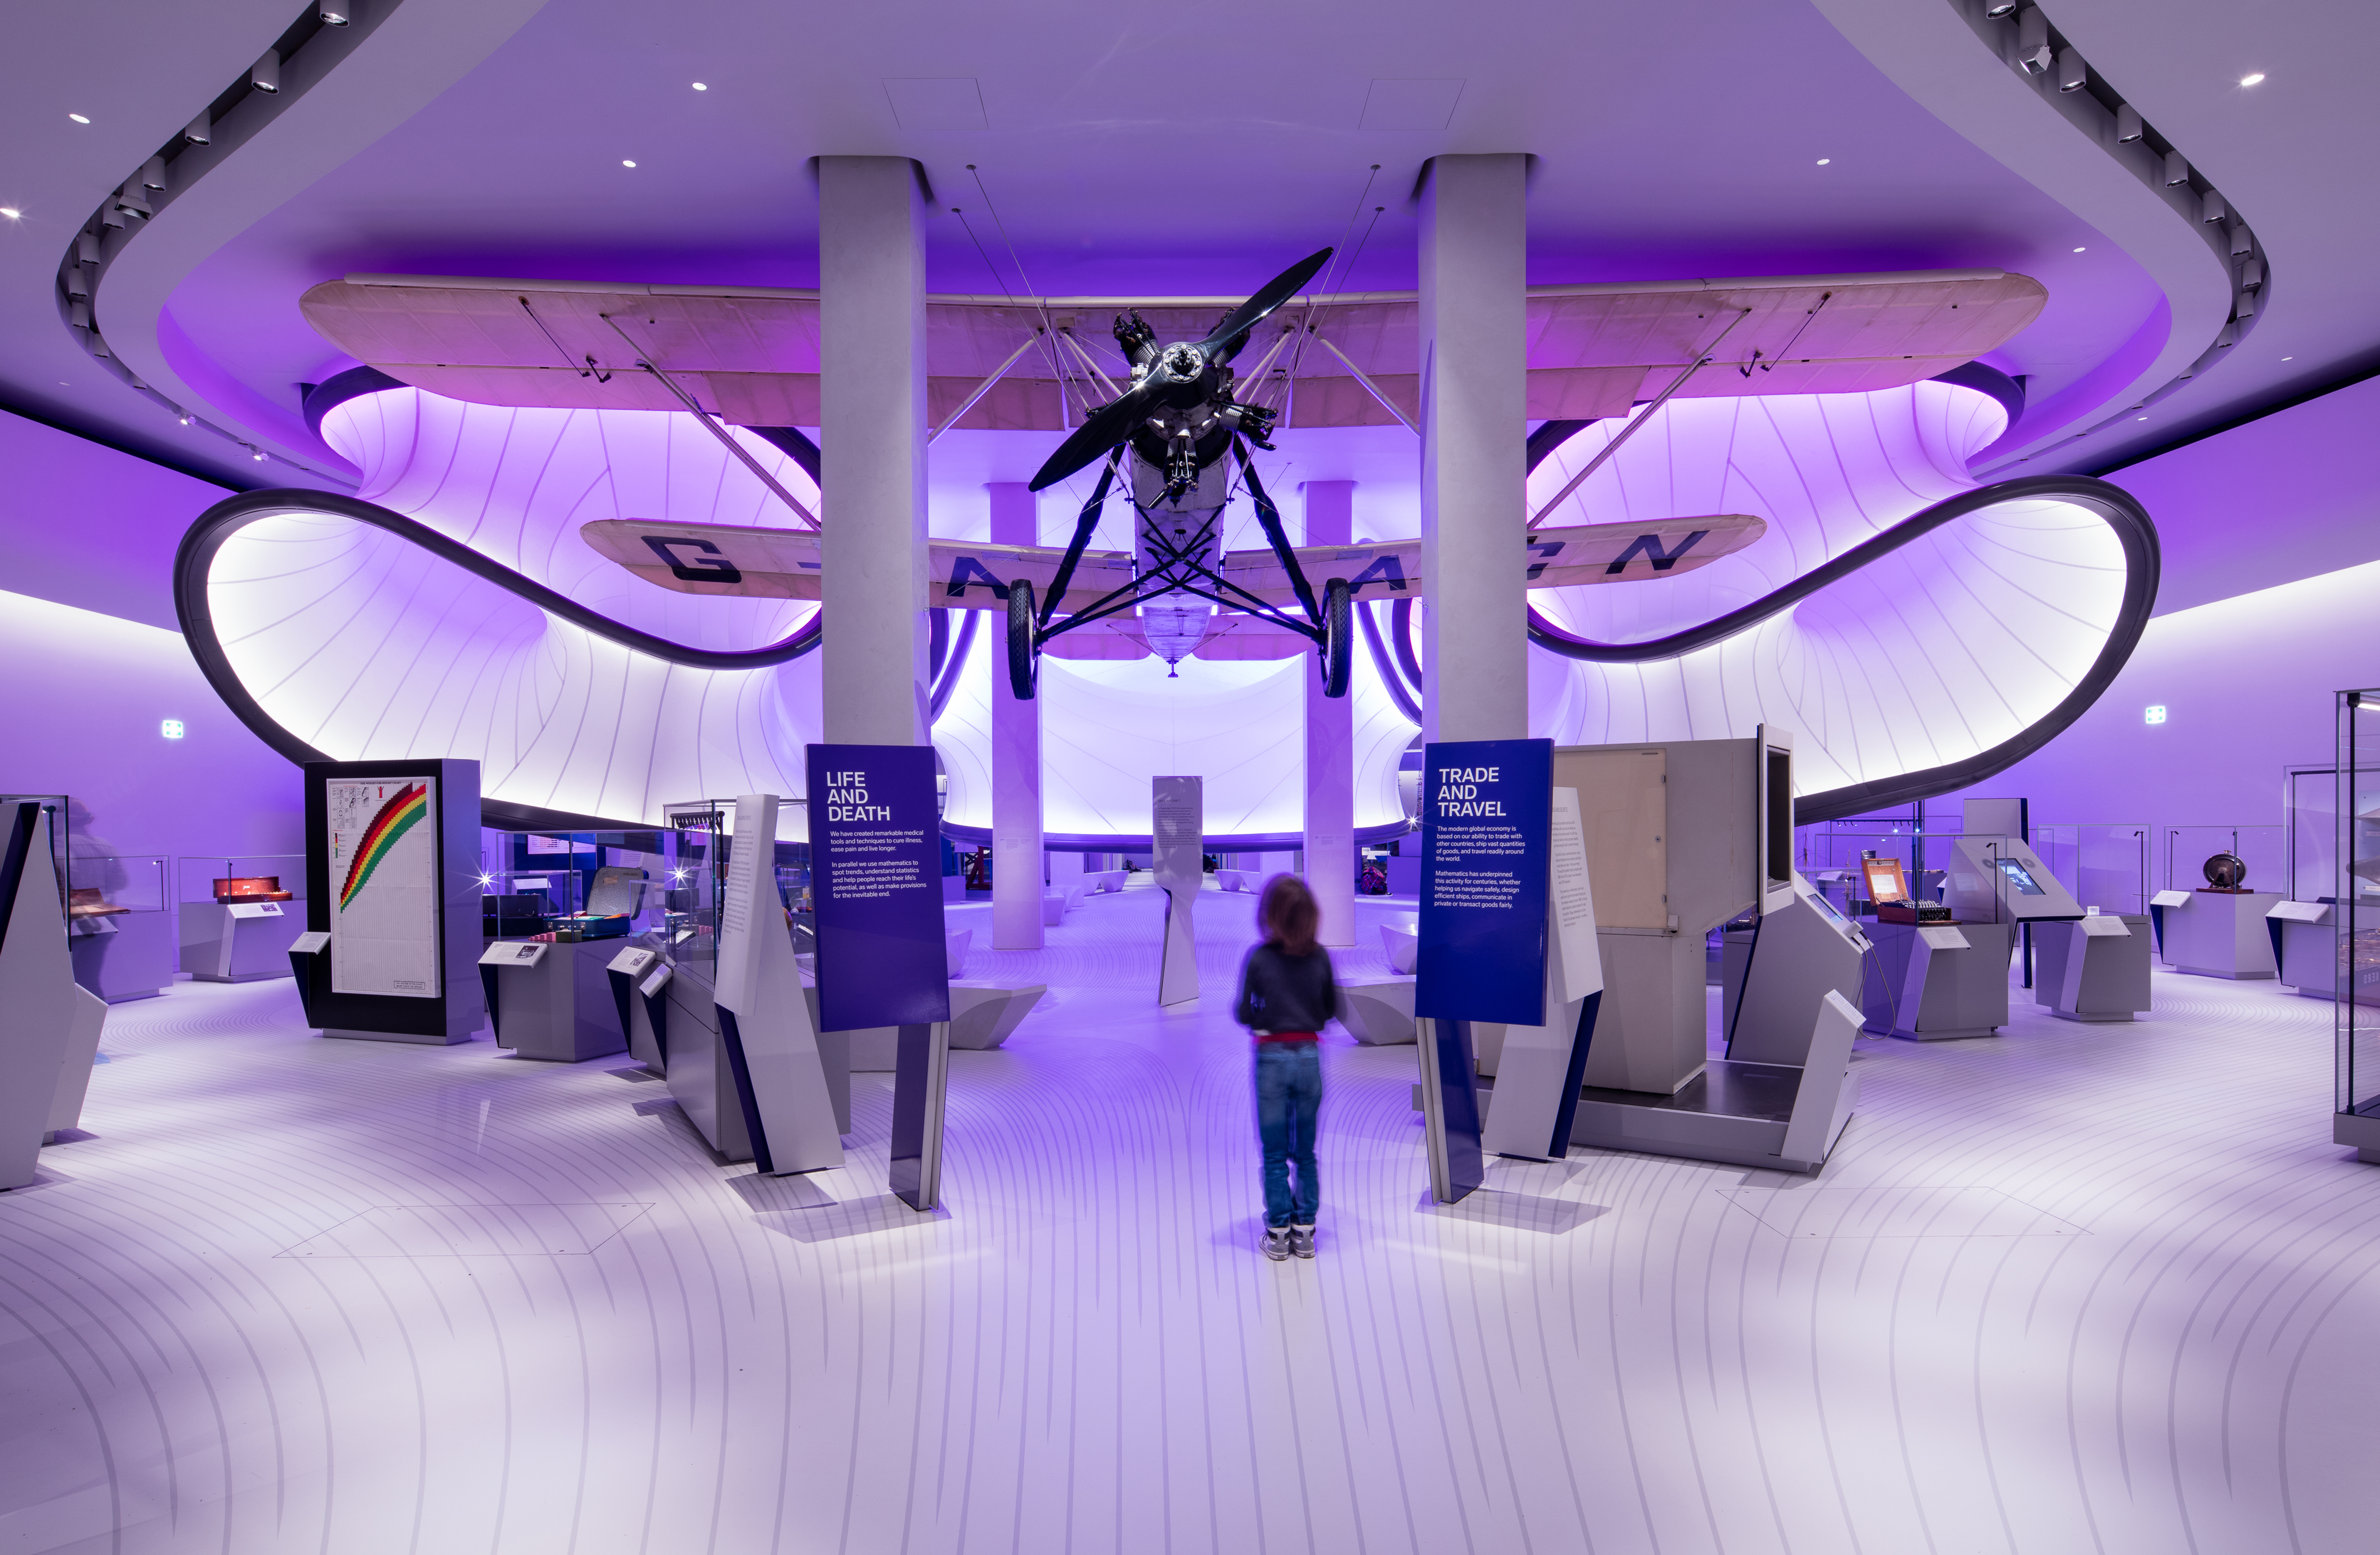 Interior shot of gallery with hanging aircraft and large curving ribbons floating above exhibition space. 